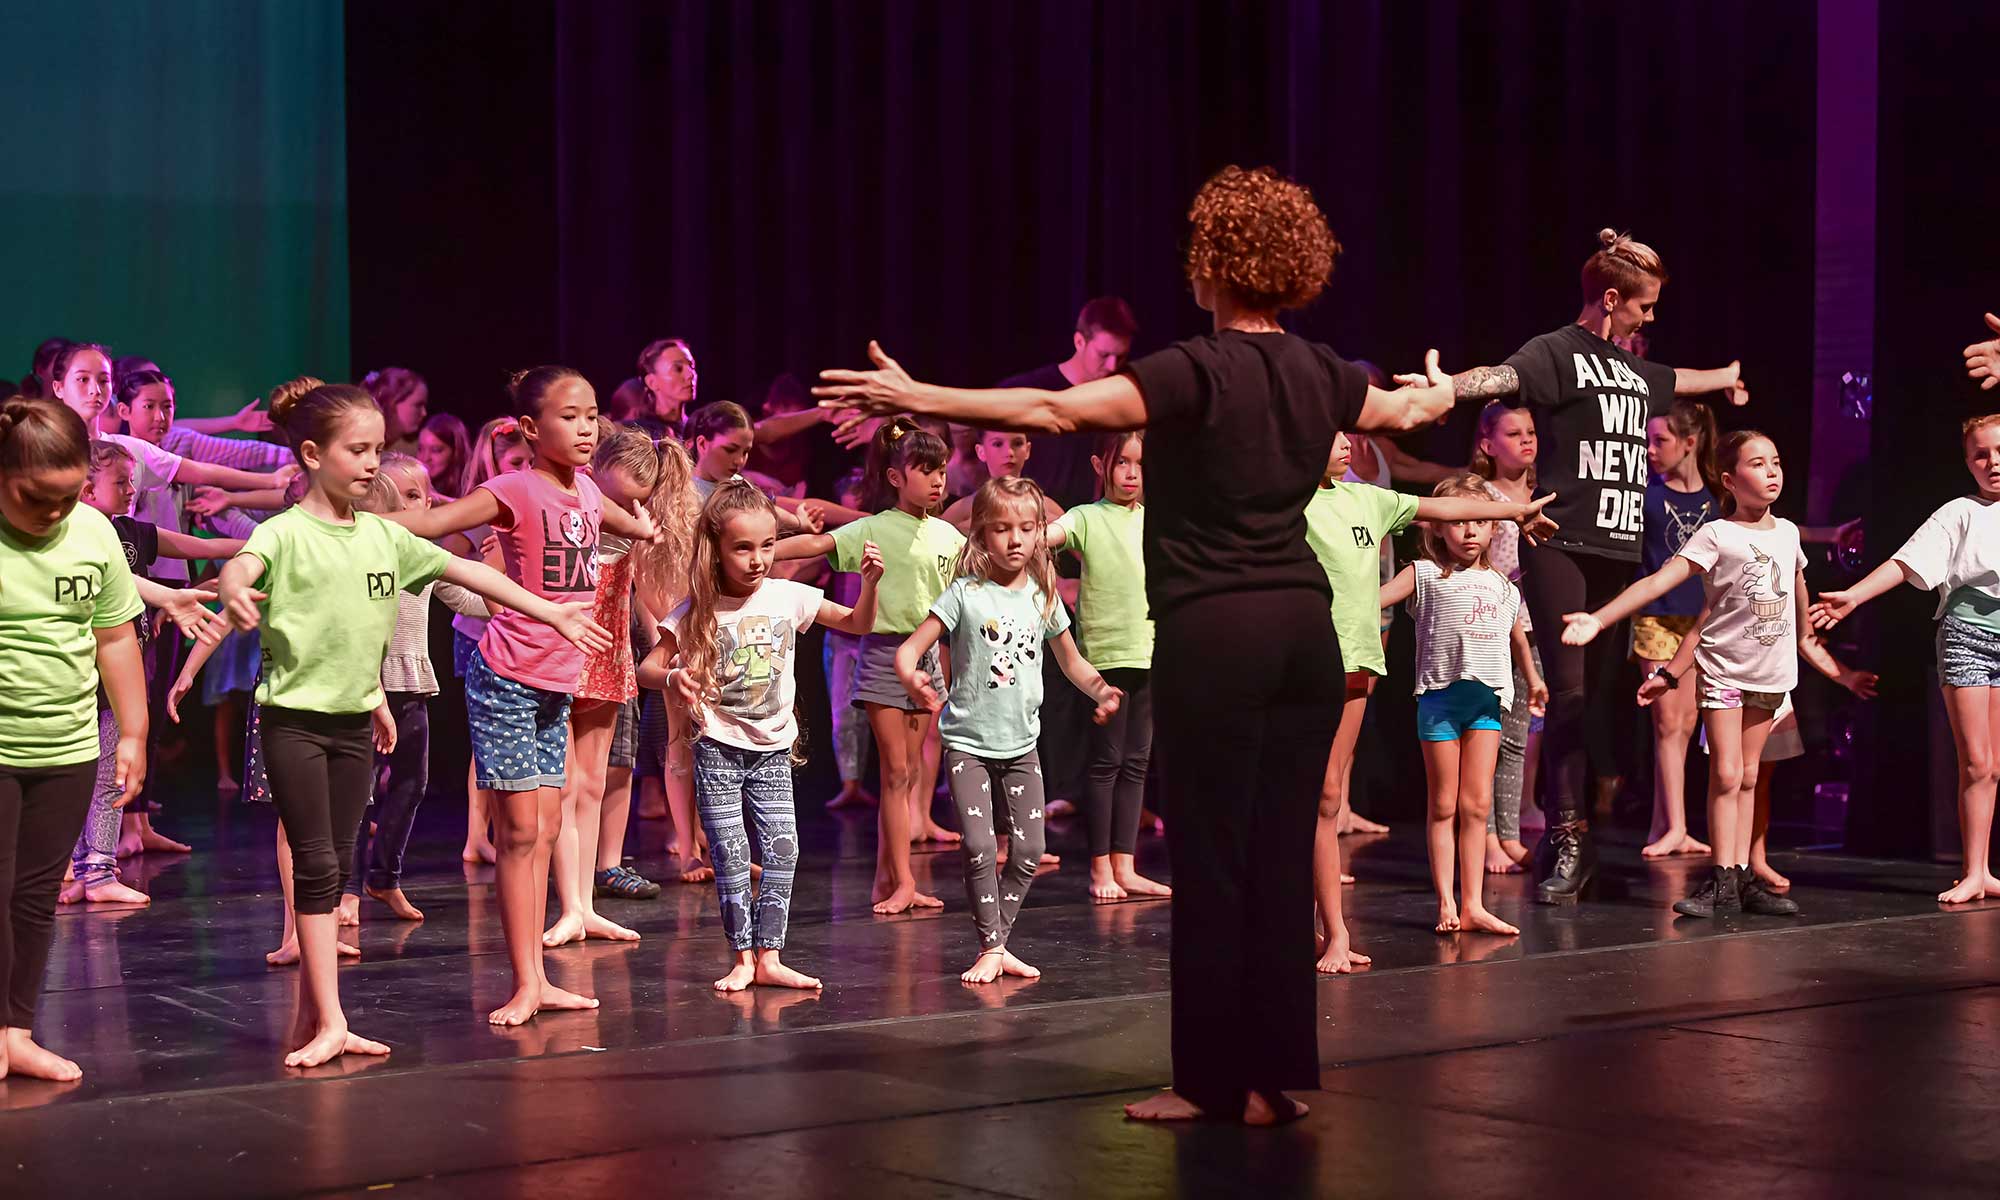 Dance classes warm up by Prince Dance Institute instructors